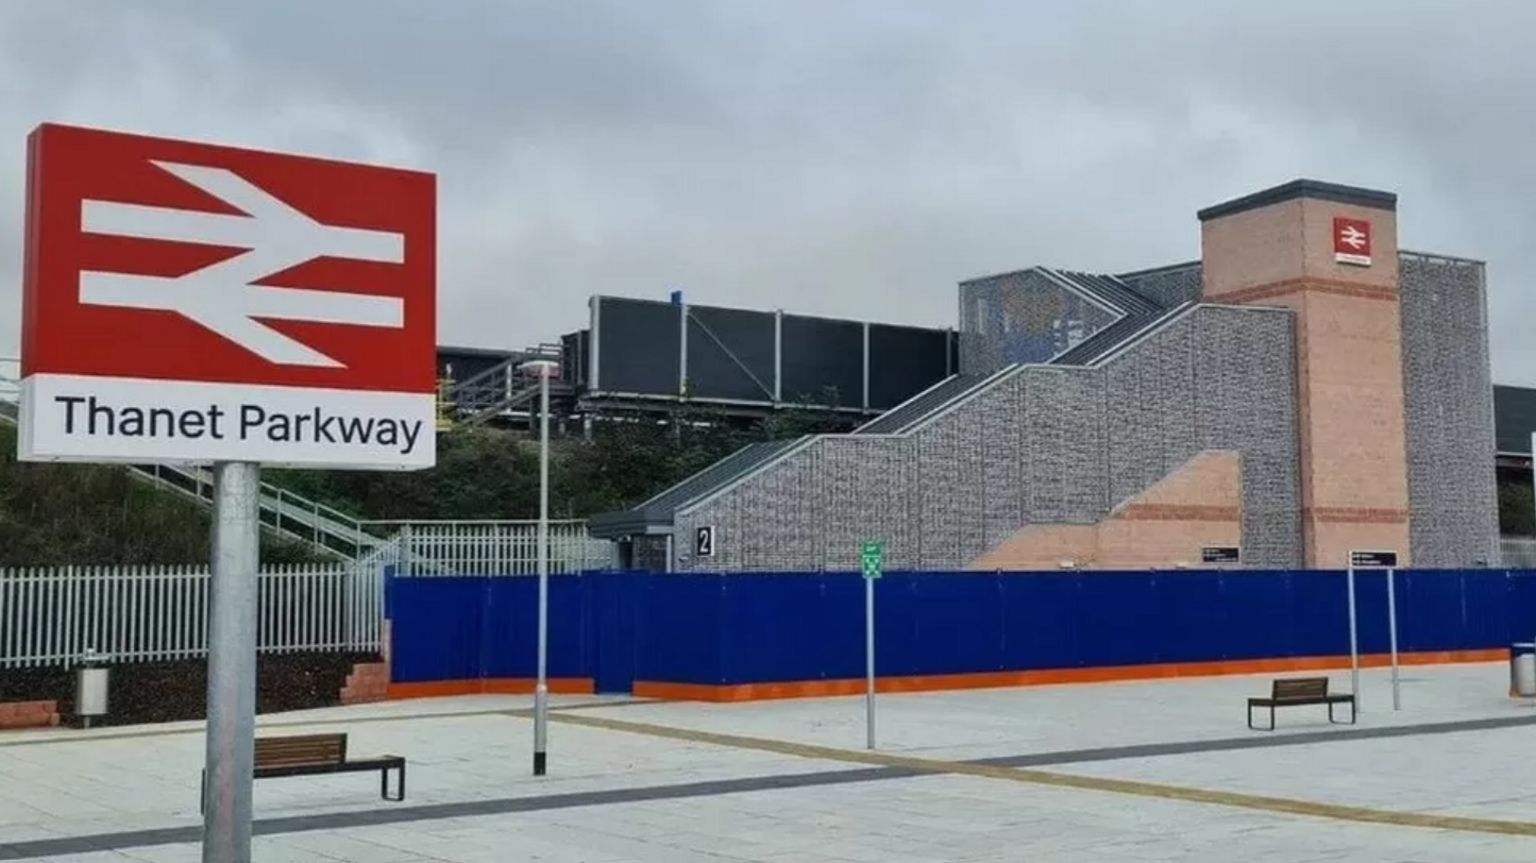 Thanet Parkway station is due to open in July